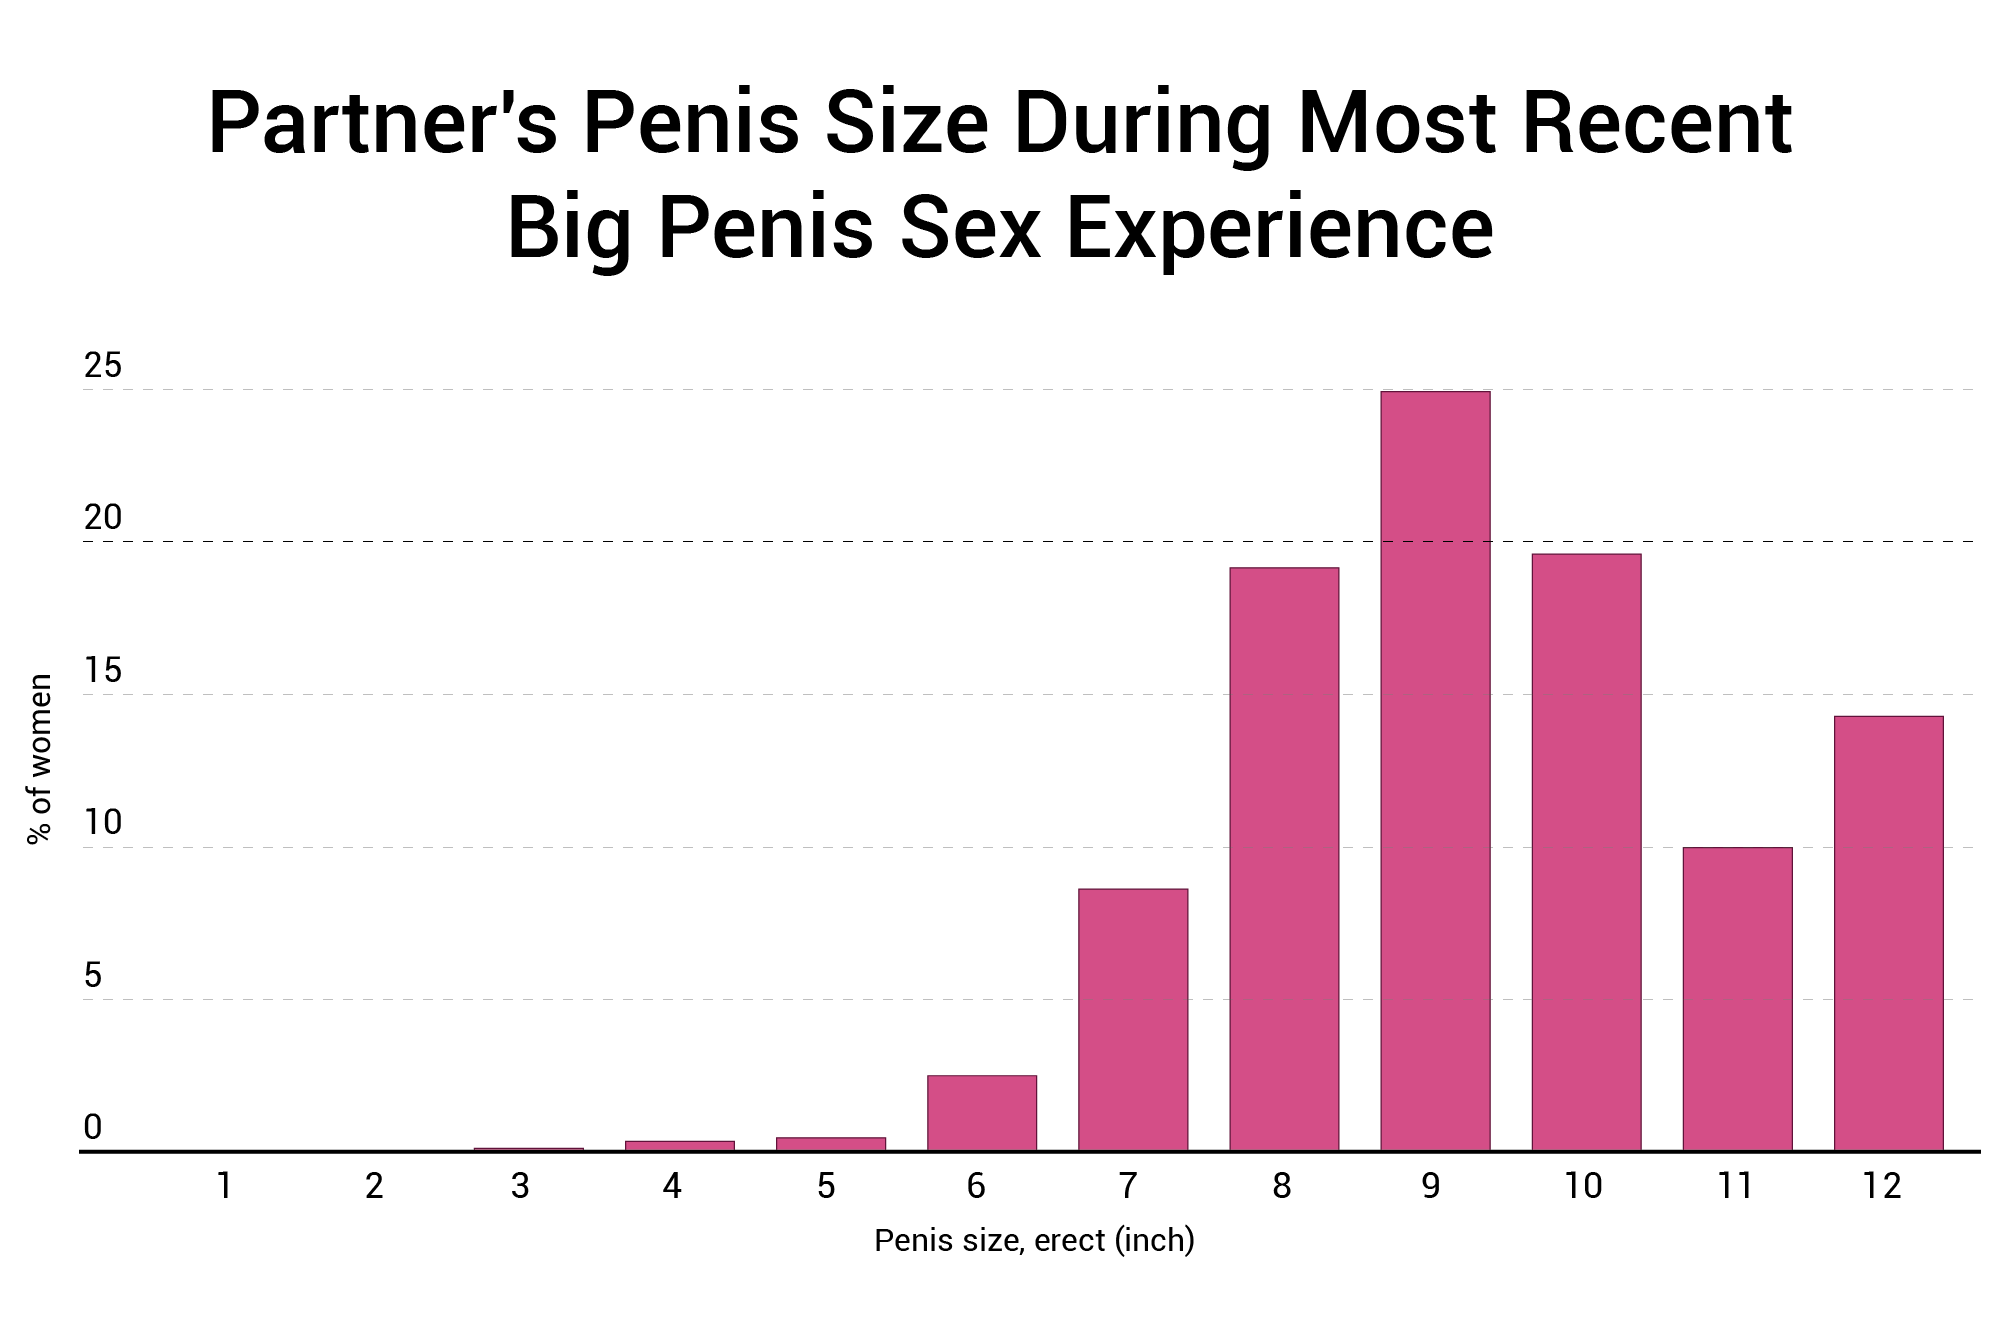 Partners-Penis-Size-During-Most-Recent-Big-Penis-Sex-Experience.png